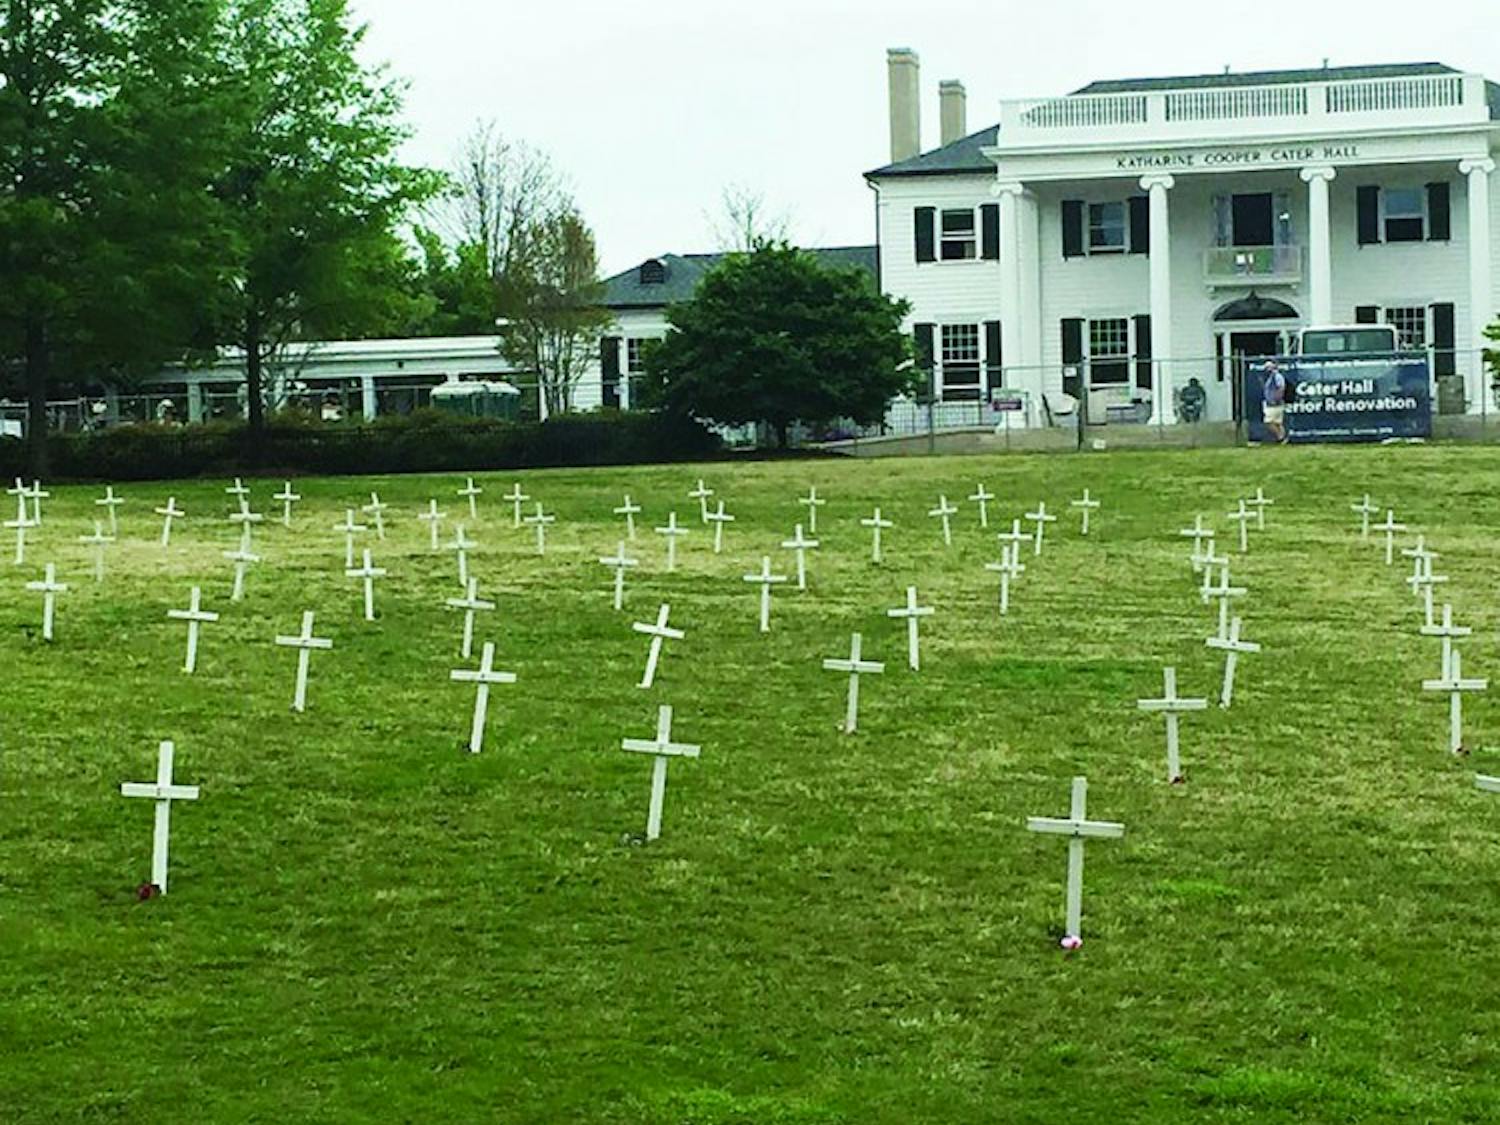 Each cross represents 20 abortions per day.&nbsp;